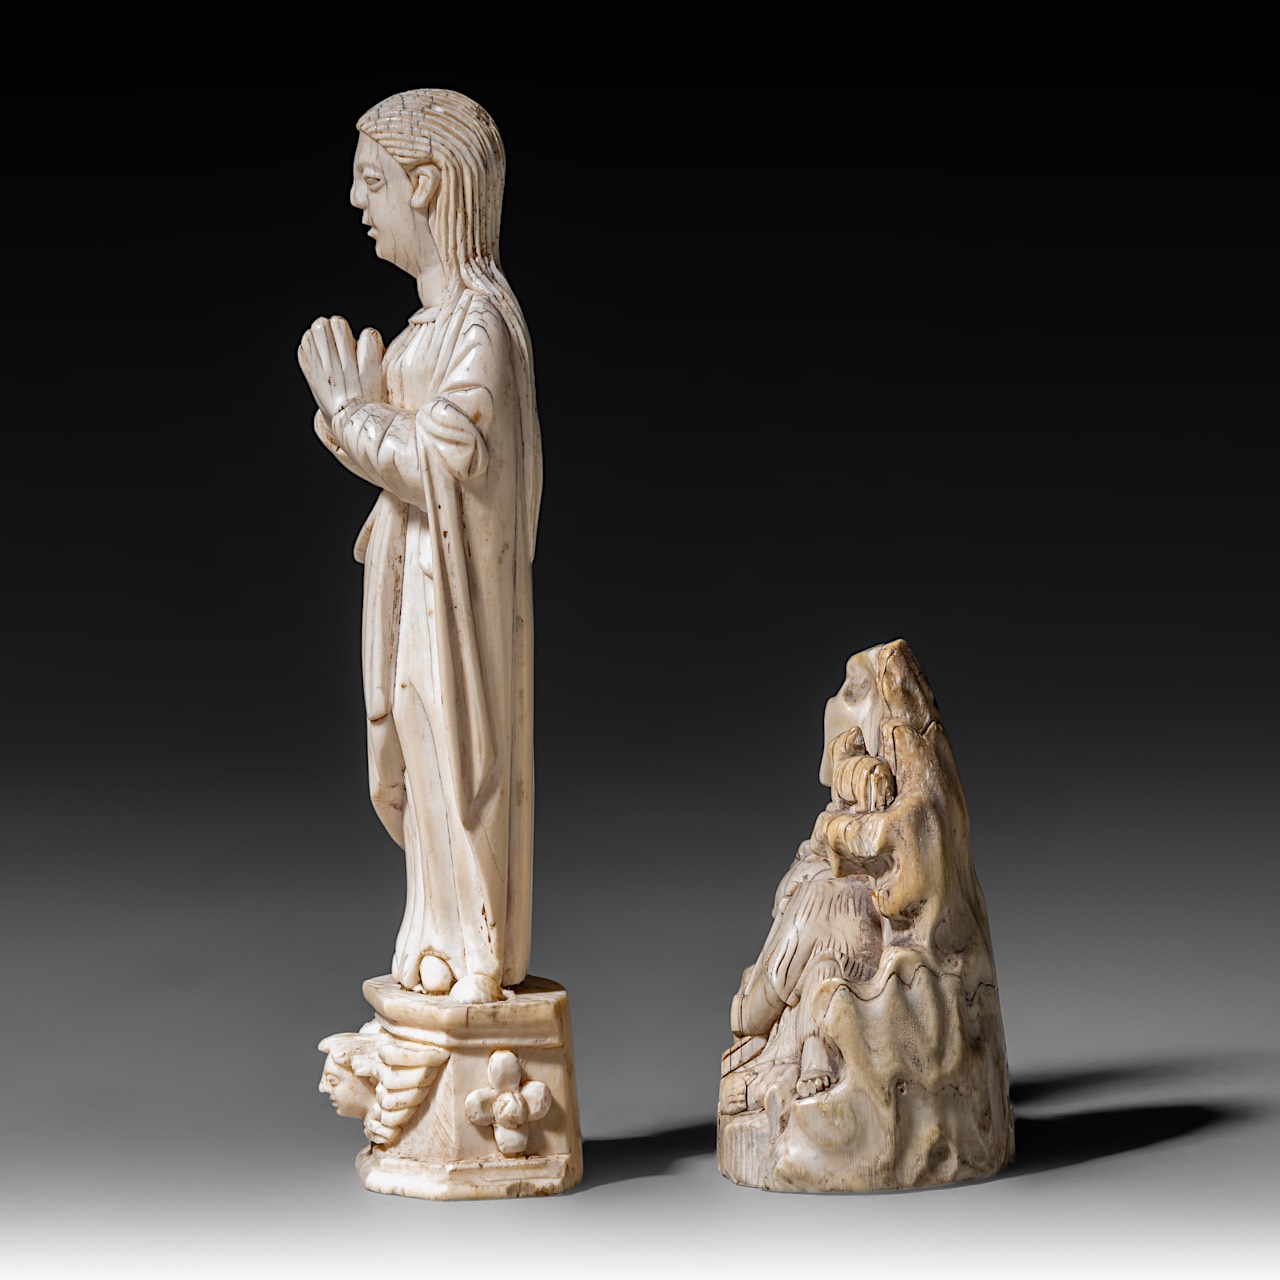 Two carved ivory Indo-Portuguese religious figures; one depicts an upright standing and praying Virg - Image 3 of 8